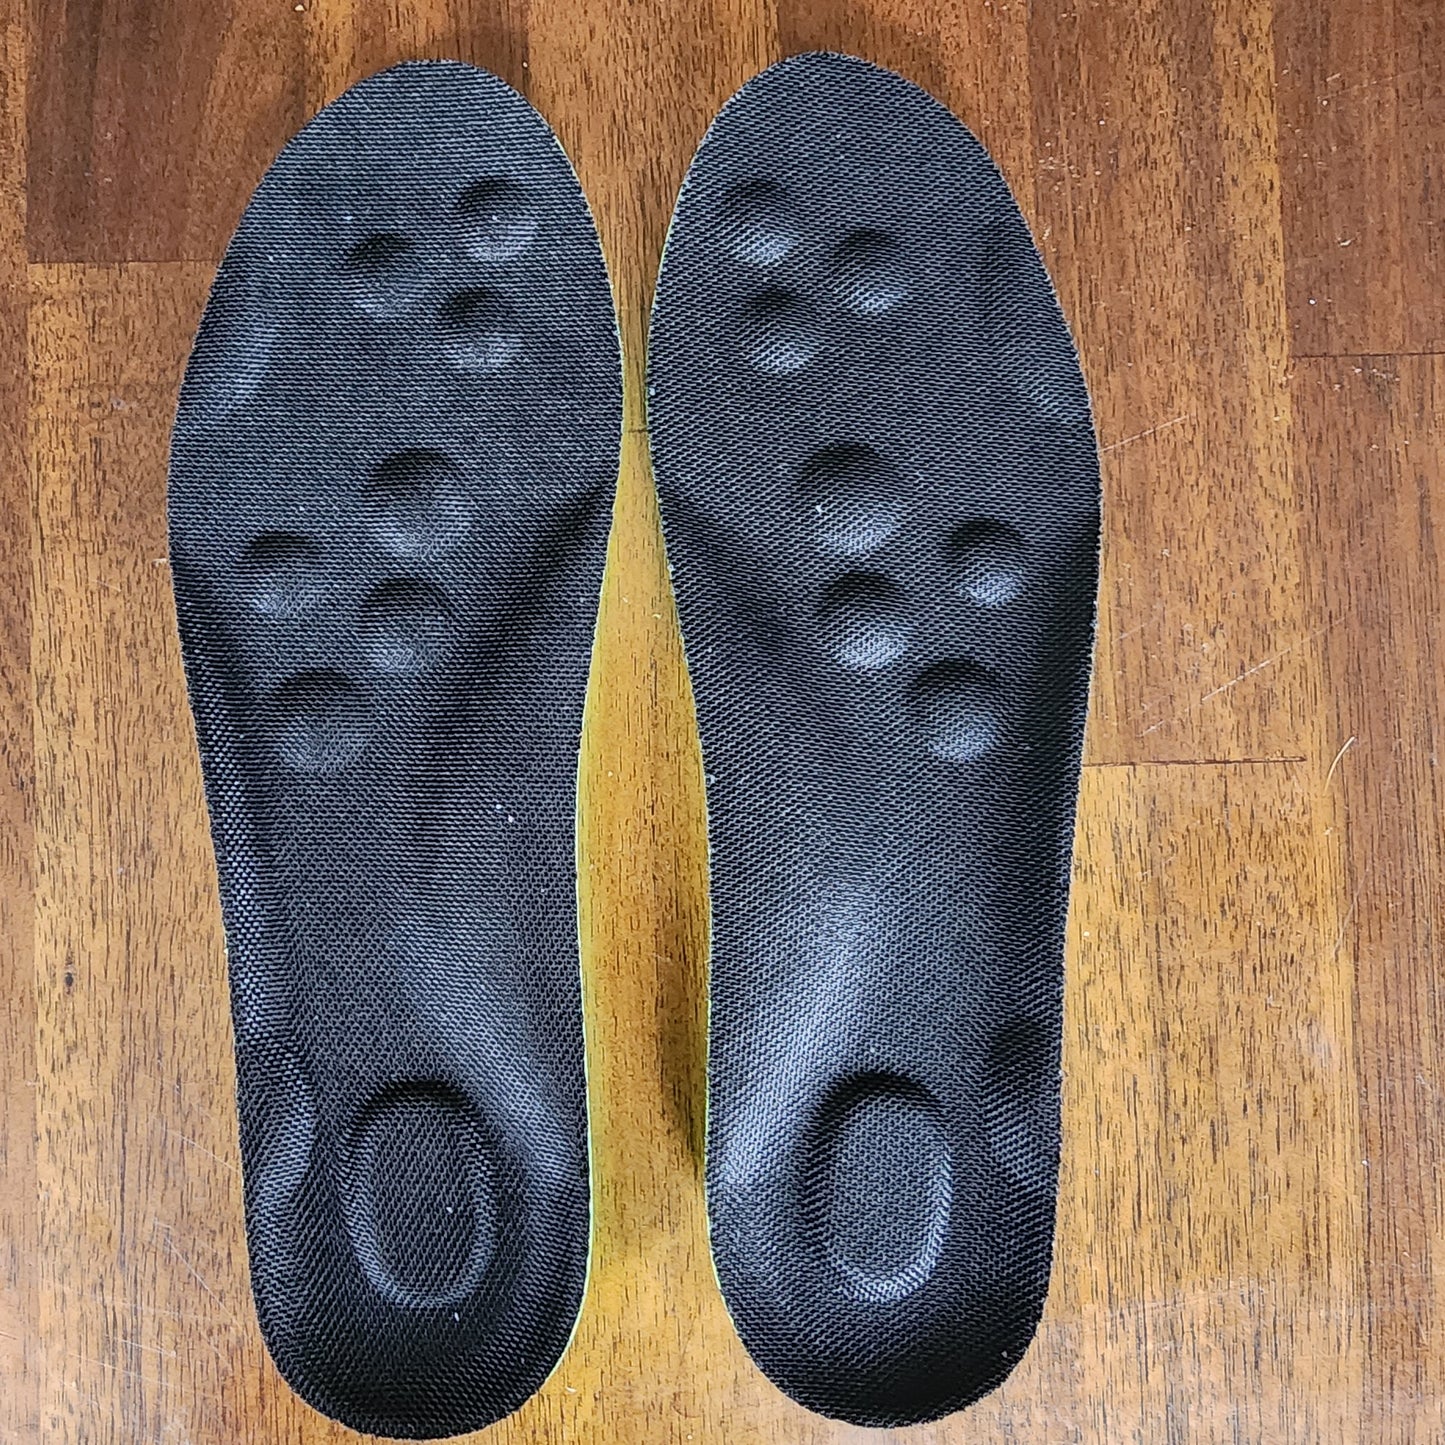 Inner sole for boots and heal raiser